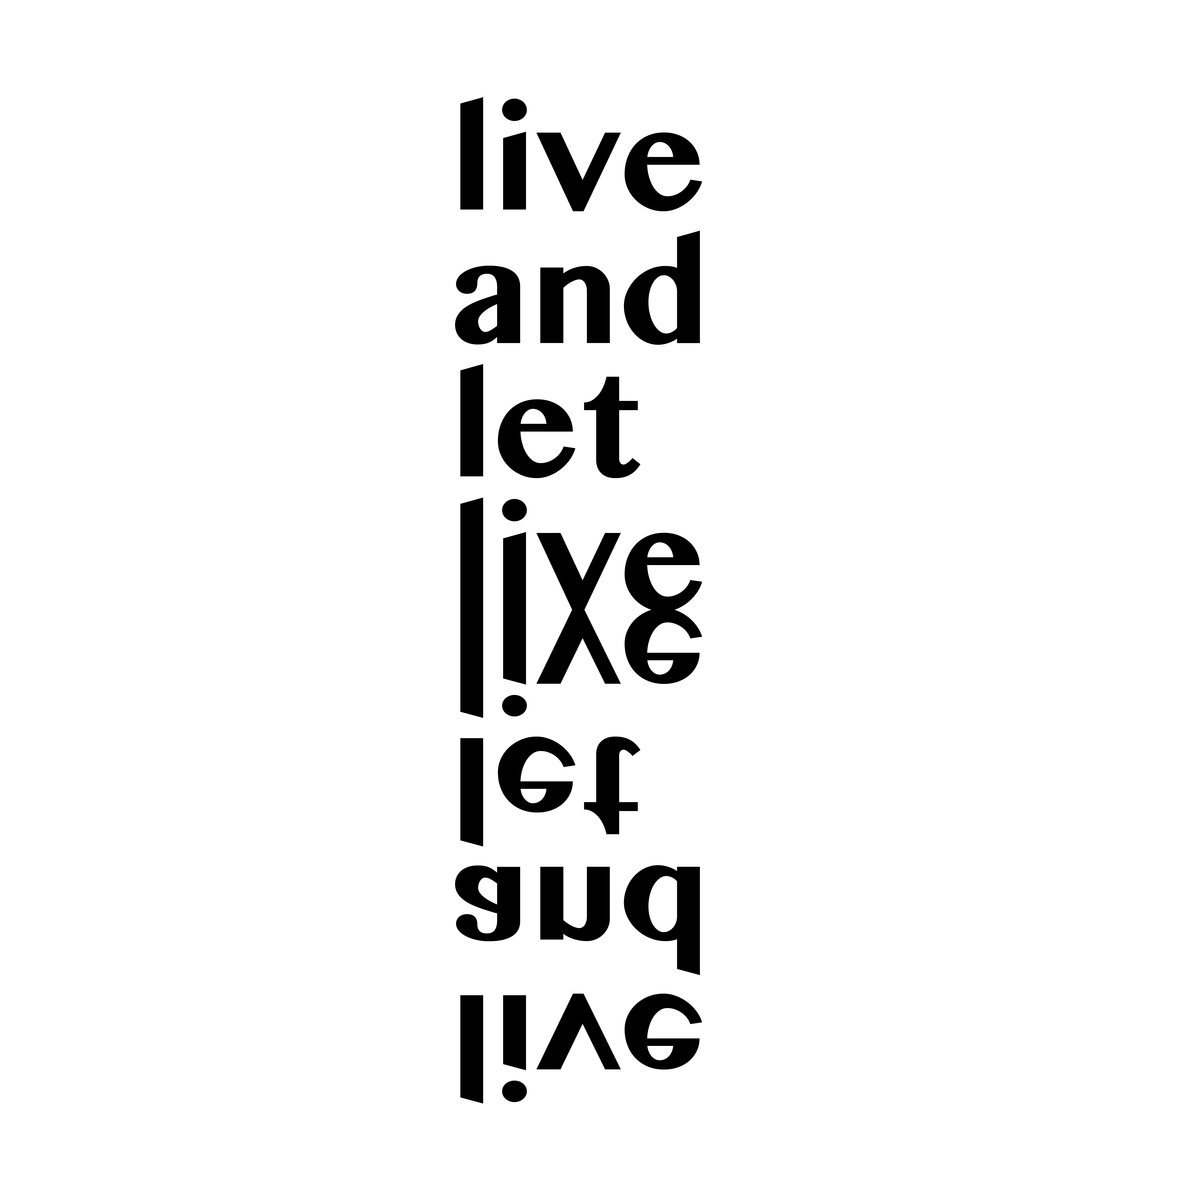 live-and-let-live-by-haniyeh-on-dribbble